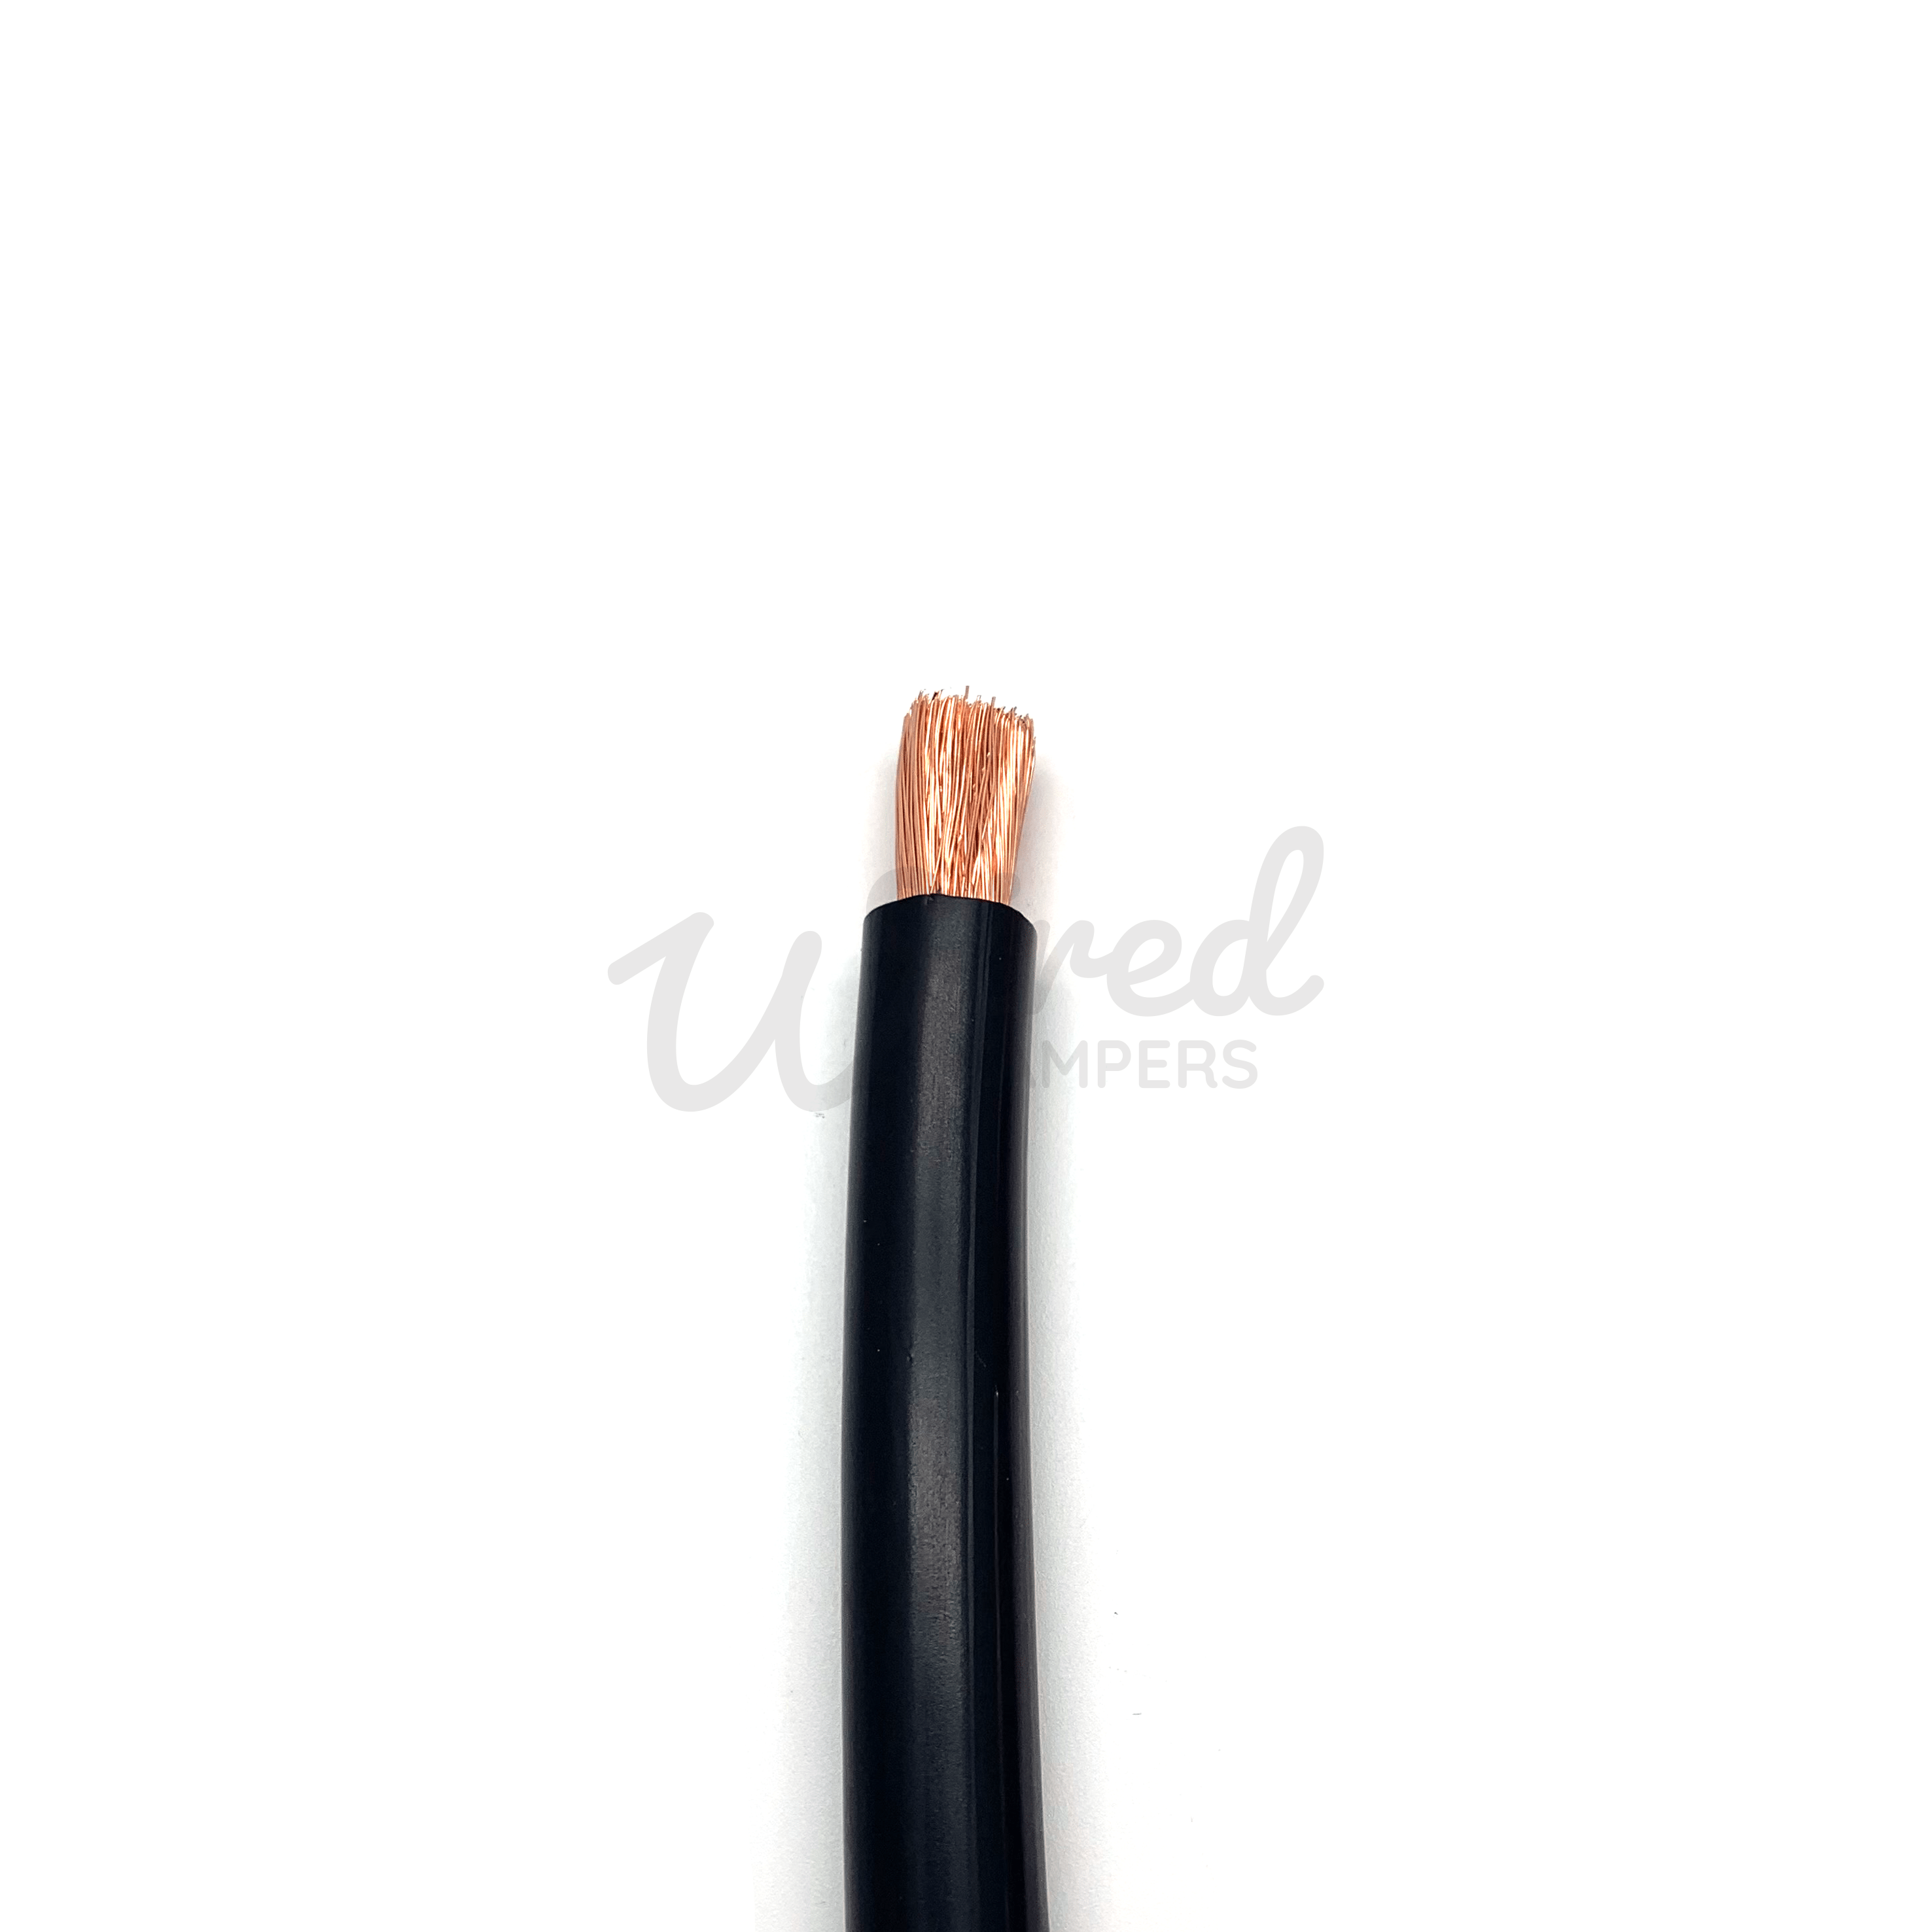 Wired Campers Limited 5M - 50mm² 345A Hi-Flex Battery/Welding/Inverter Flexible Cable - Black Negative